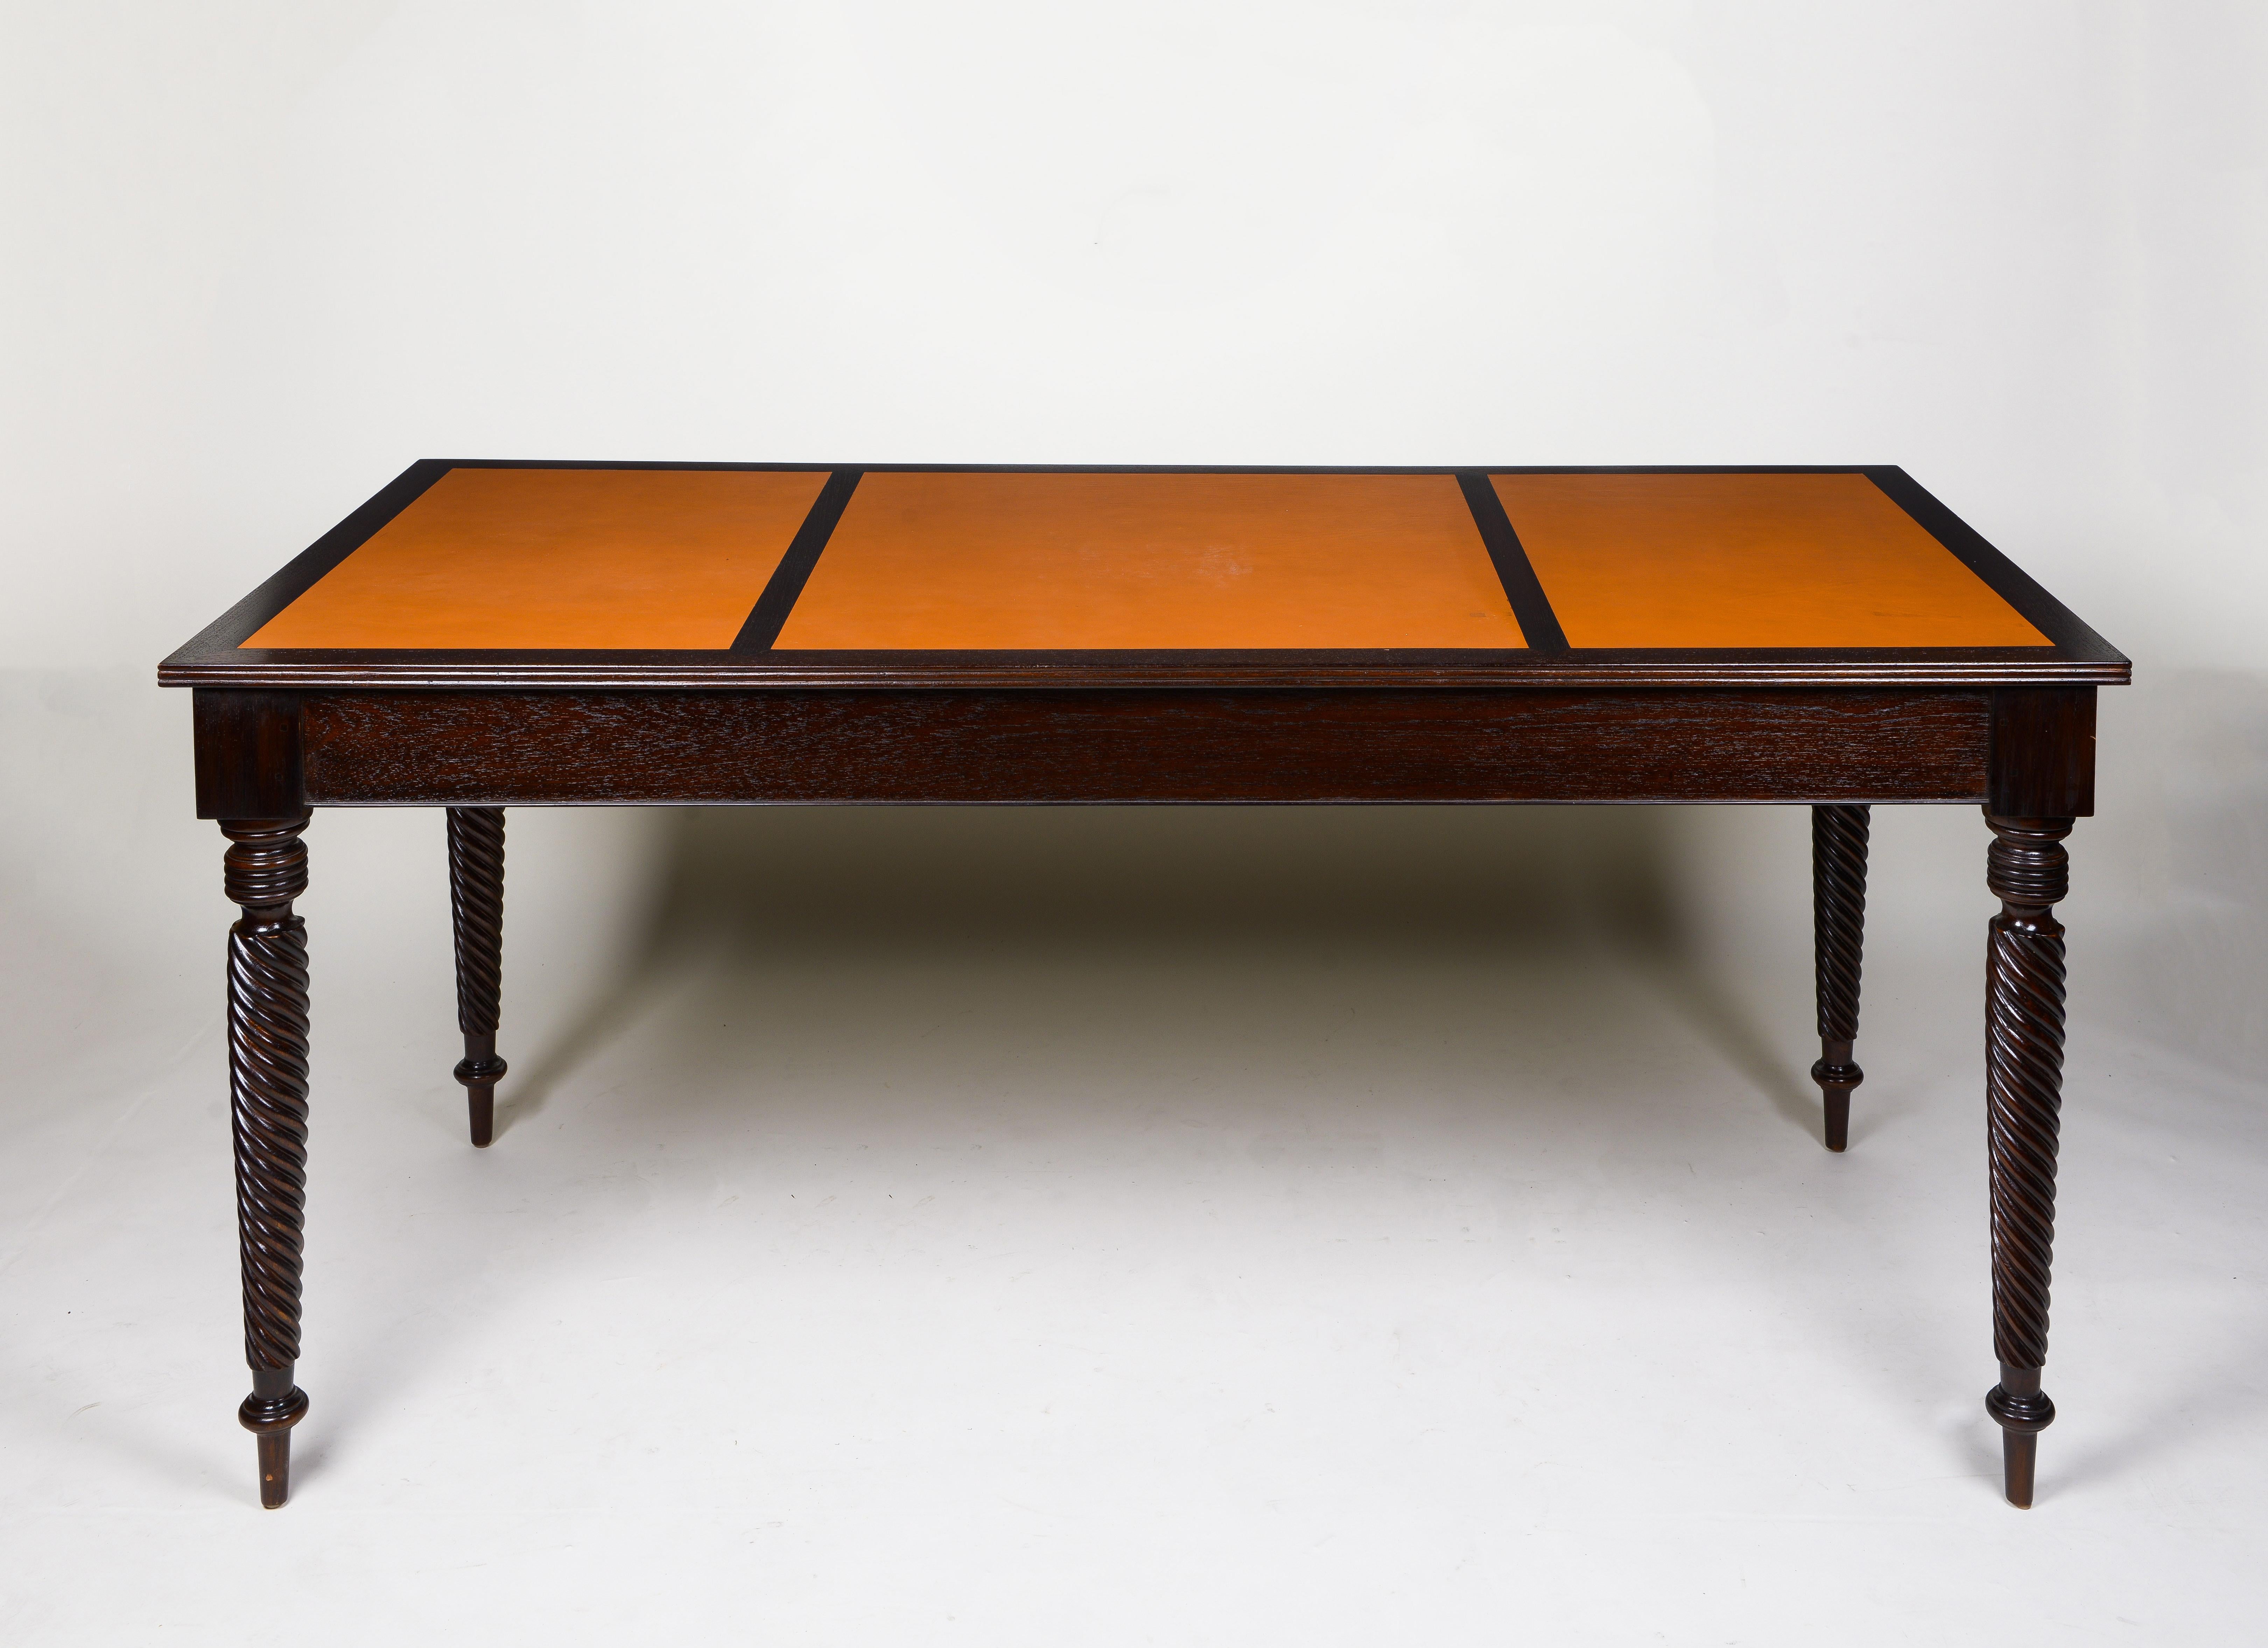 Neoclassical Style Mahogany-Stained Wood and Leather-Lined Writing Table 1